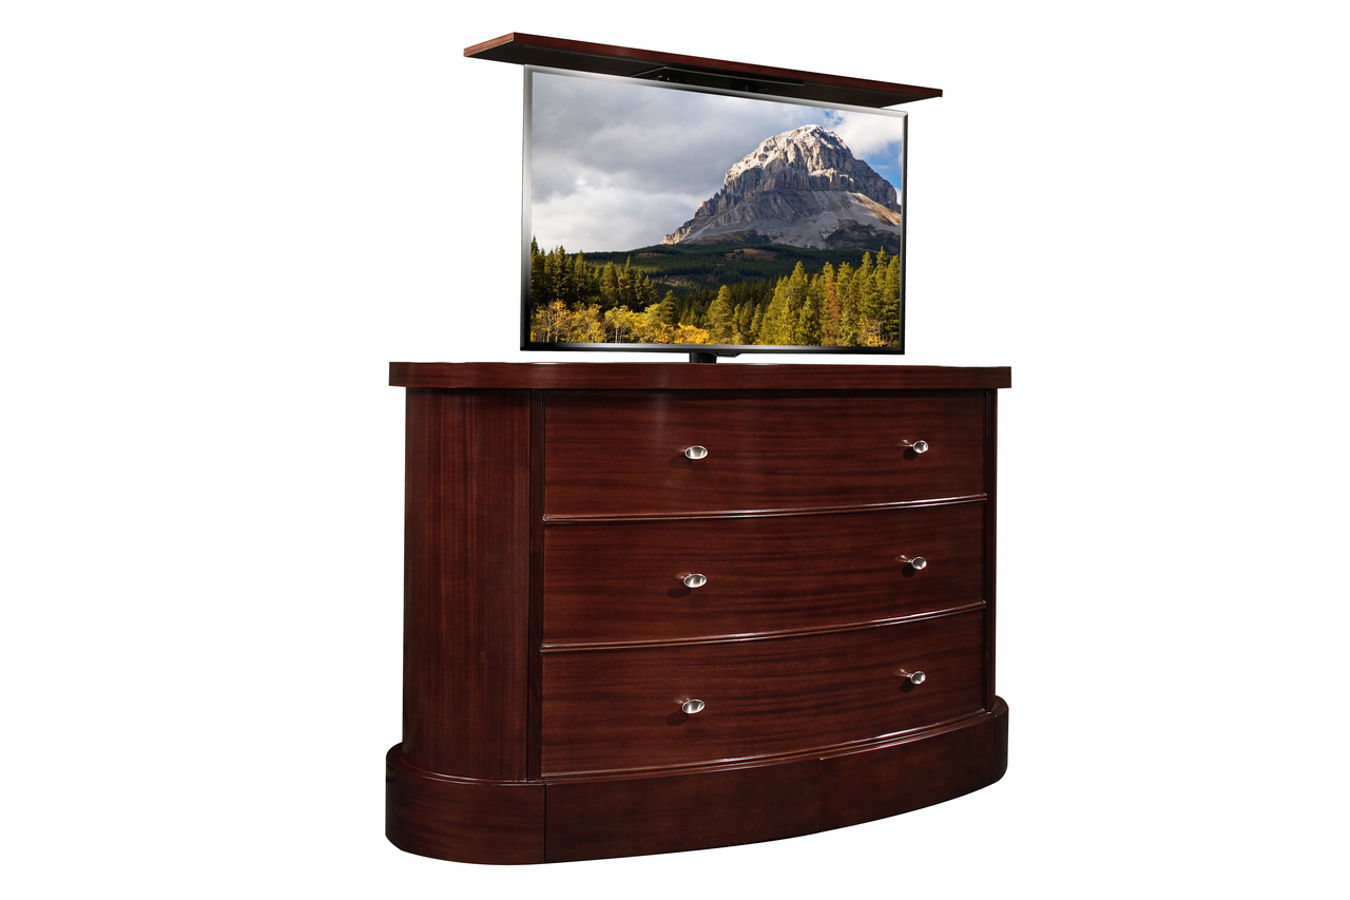 Hidden TV lift flat screen TV inside with diy cabinet kit comes in 2 different sizes.